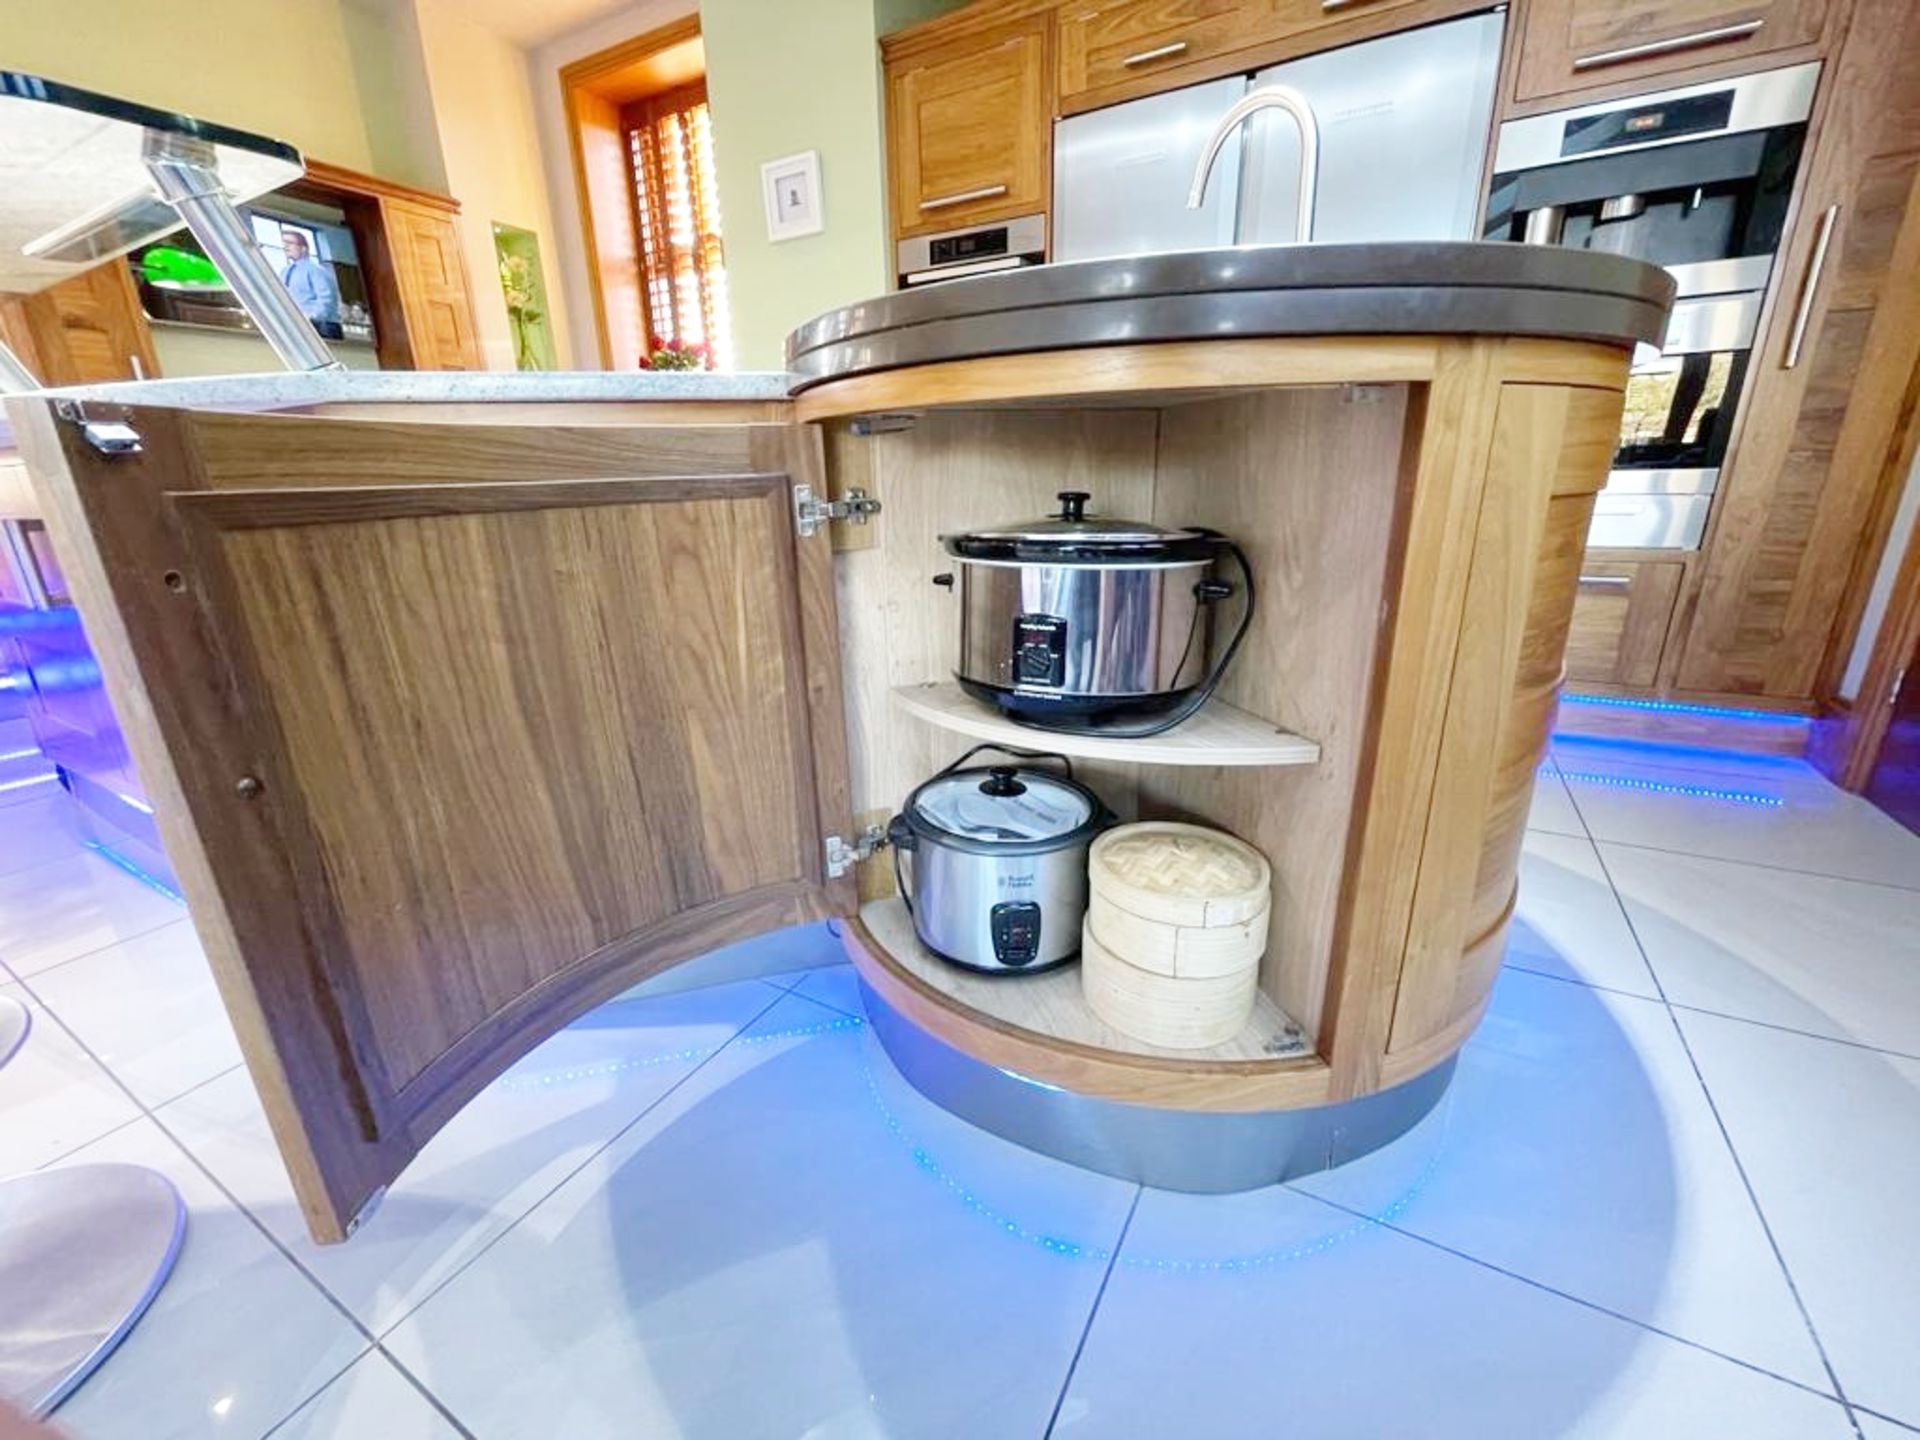 1 x Bespoke Curved Fitted Kitchen With Solid Wood Walnut Doors, Integrated Appliances, Granite Tops - Image 132 of 147